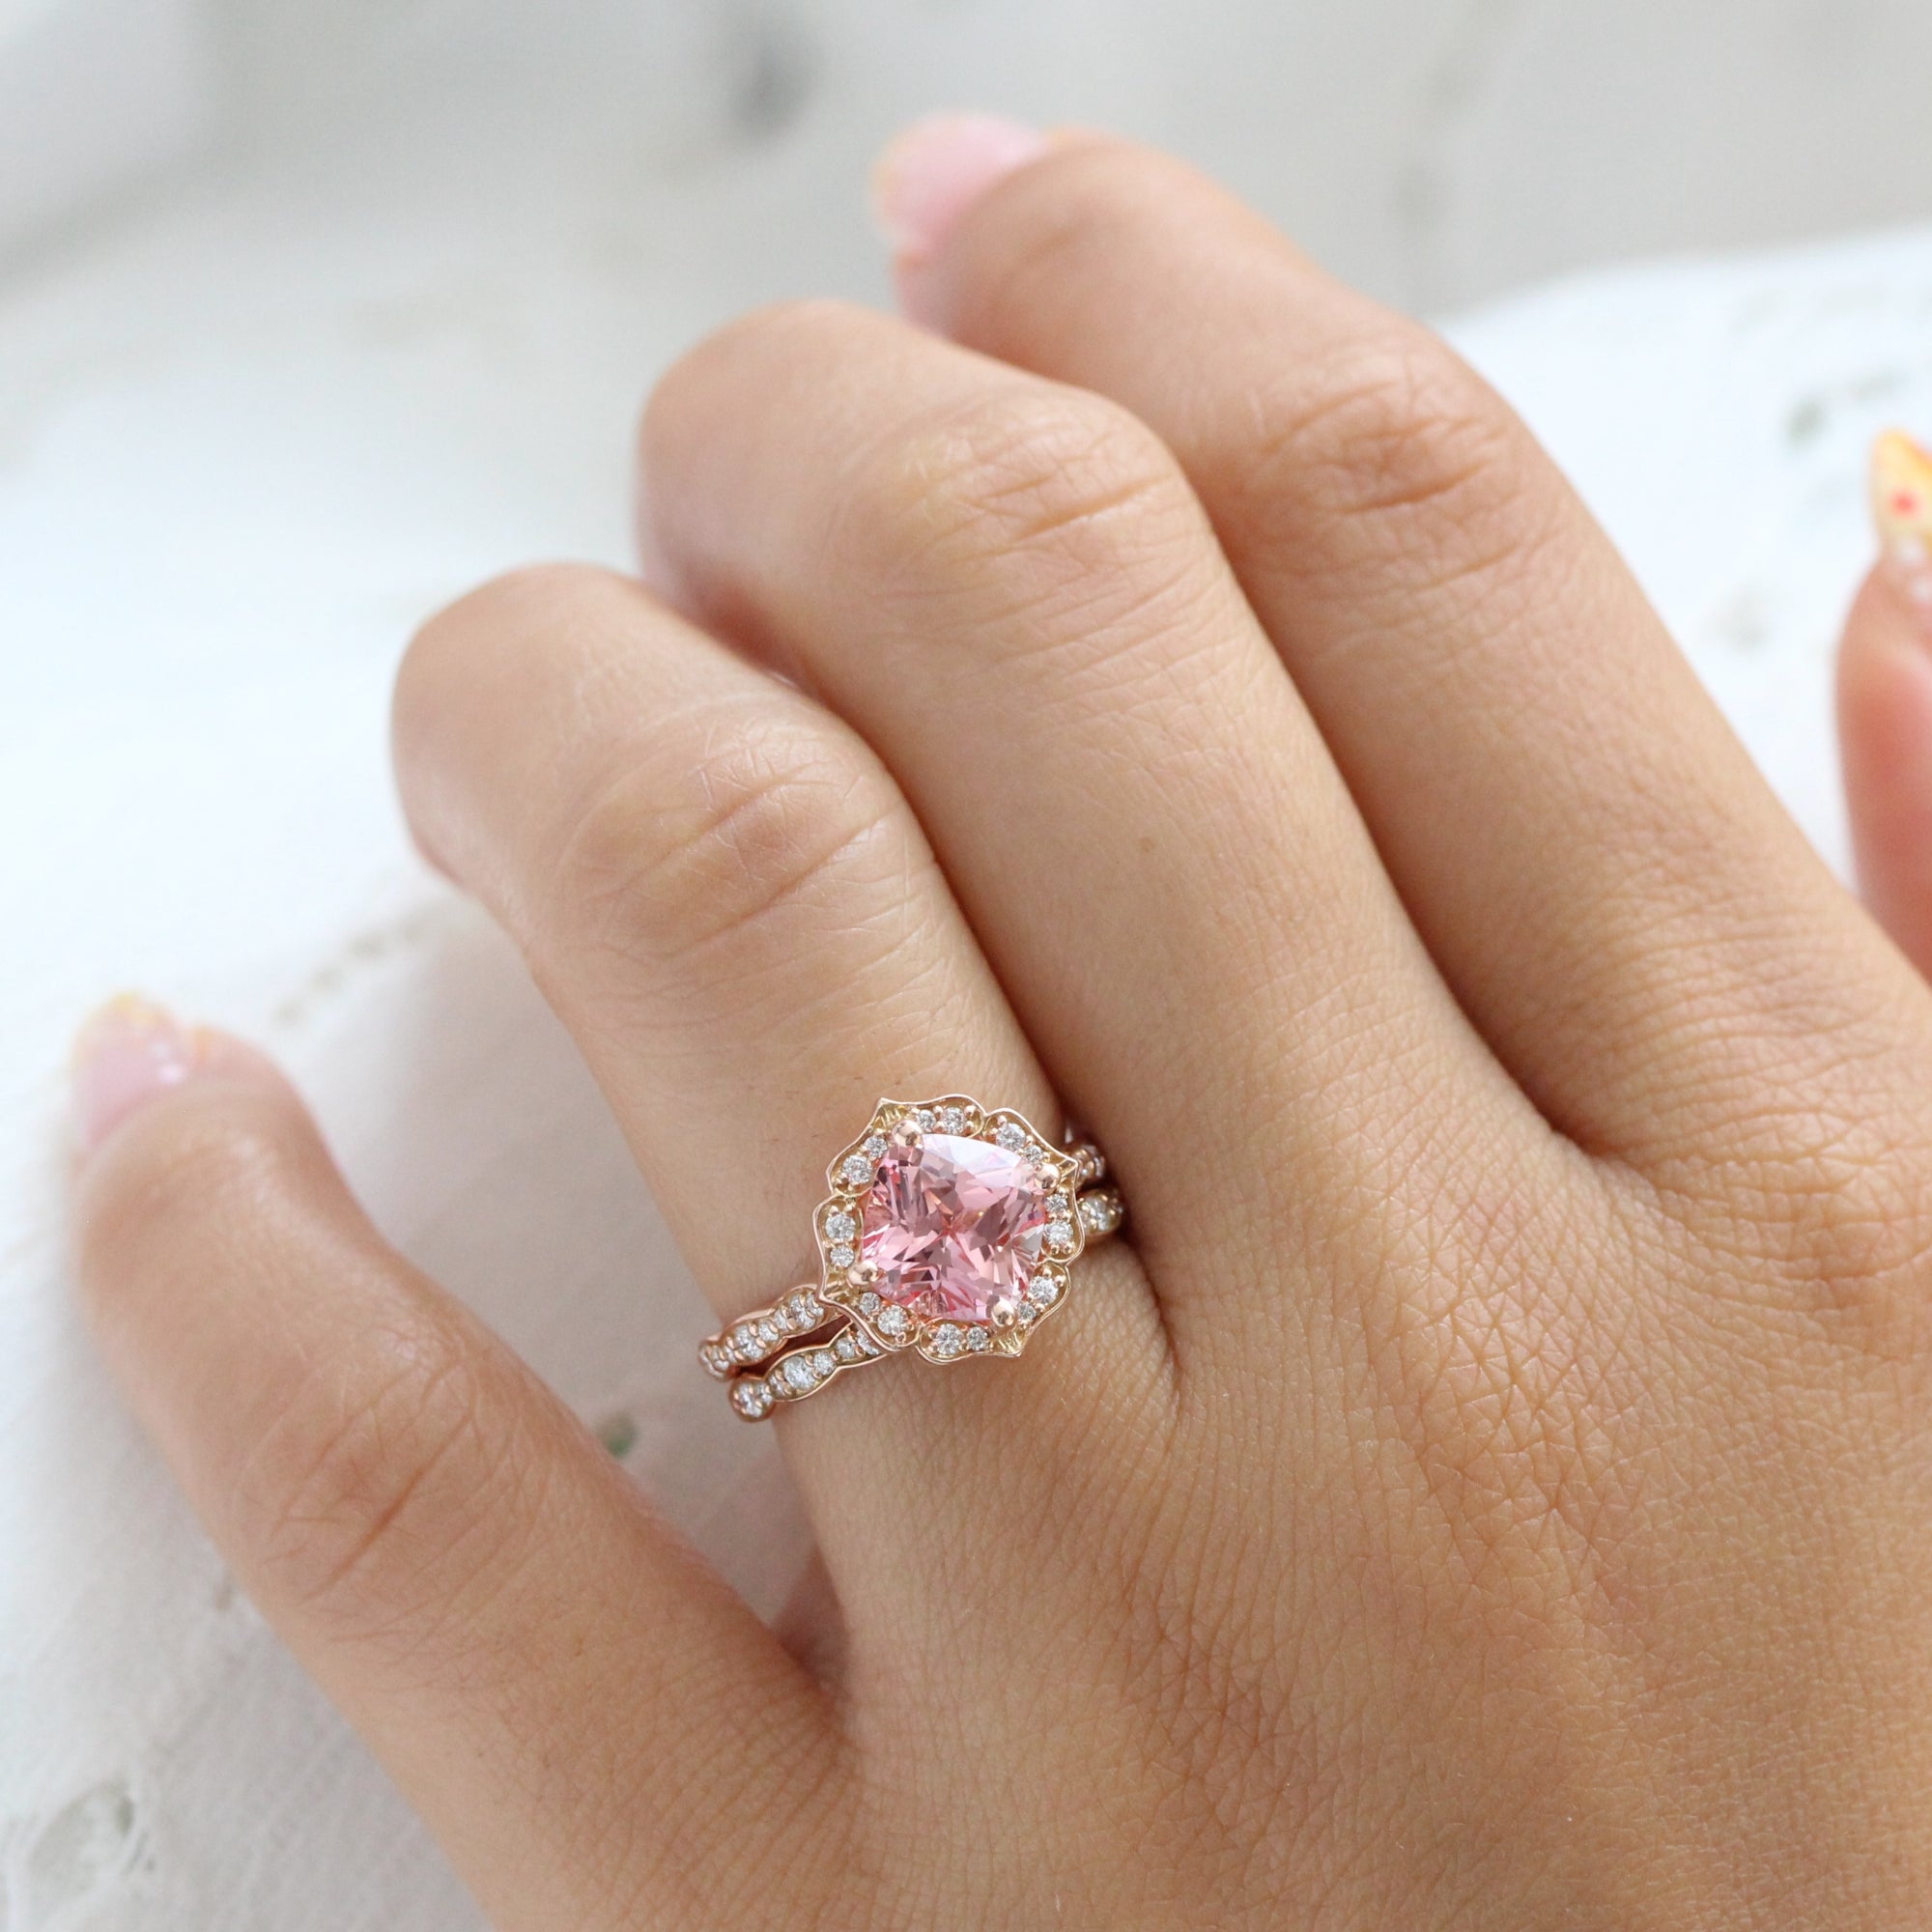 Engagement Ring Designers: 18 Ideas For Brides  Pink diamonds engagement,  Pink wedding rings, Pink engagement ring